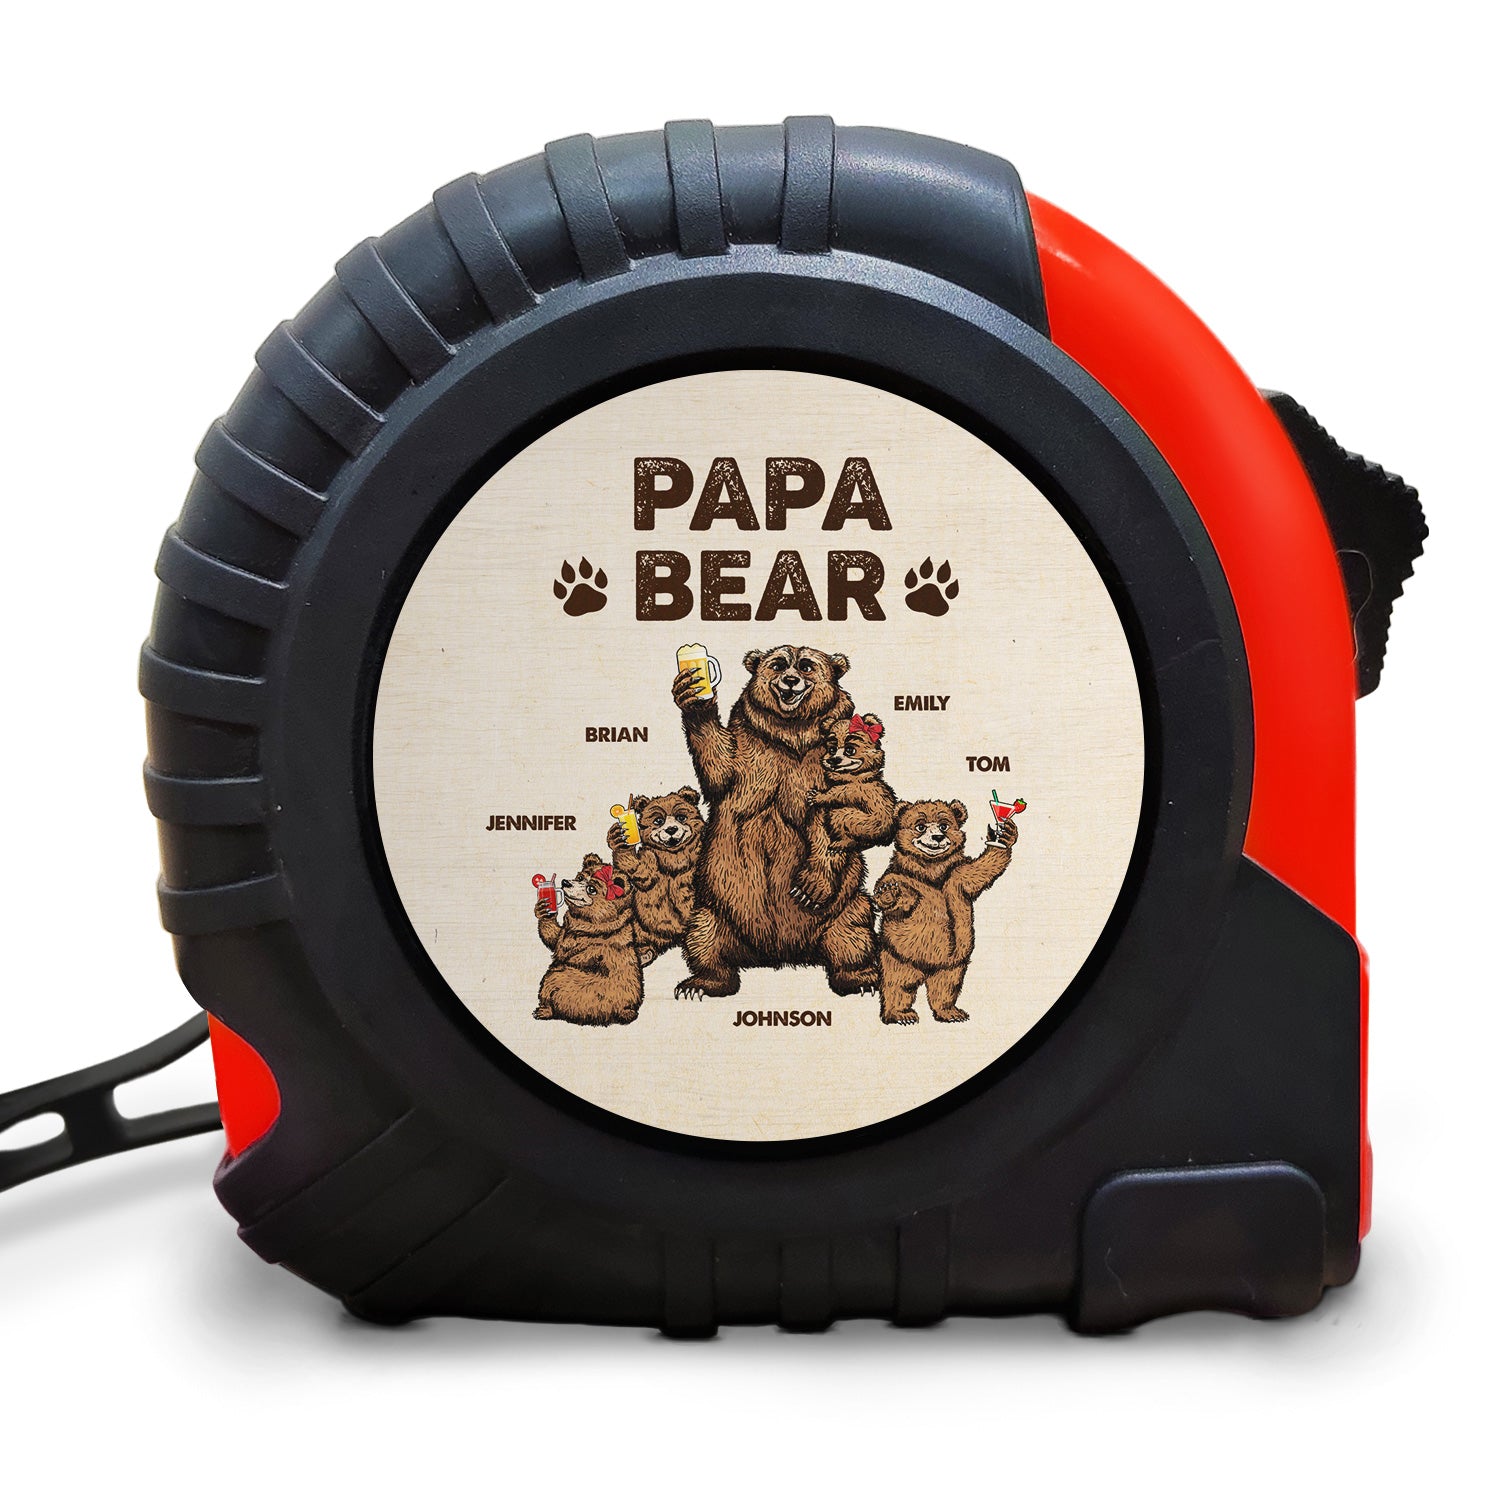 Papa Bear - Gift For Dad, Father, Grandfather, Grandpa - Personalized Tape Measure